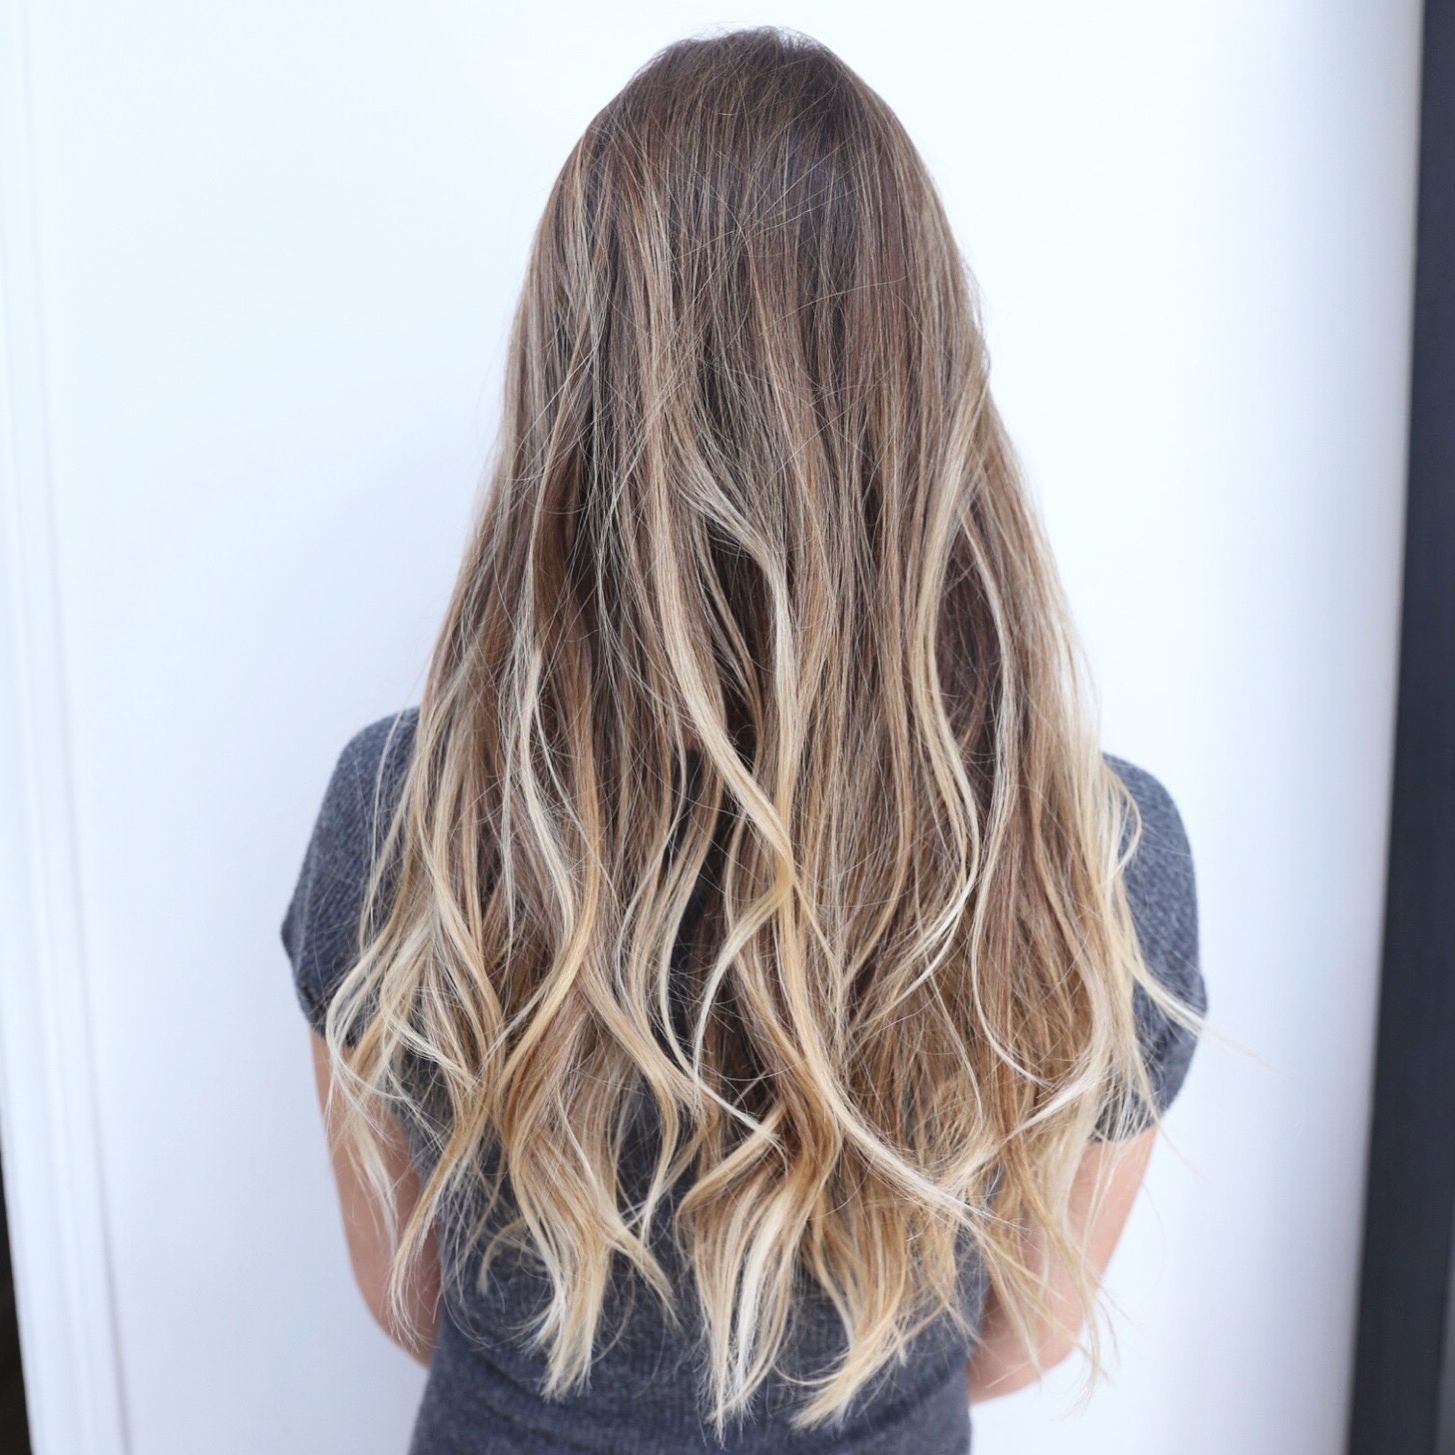 Current Beachy Waves With Ombre Intended For Beachy Ombre Highlight — Stephen Garrison (View 4 of 18)